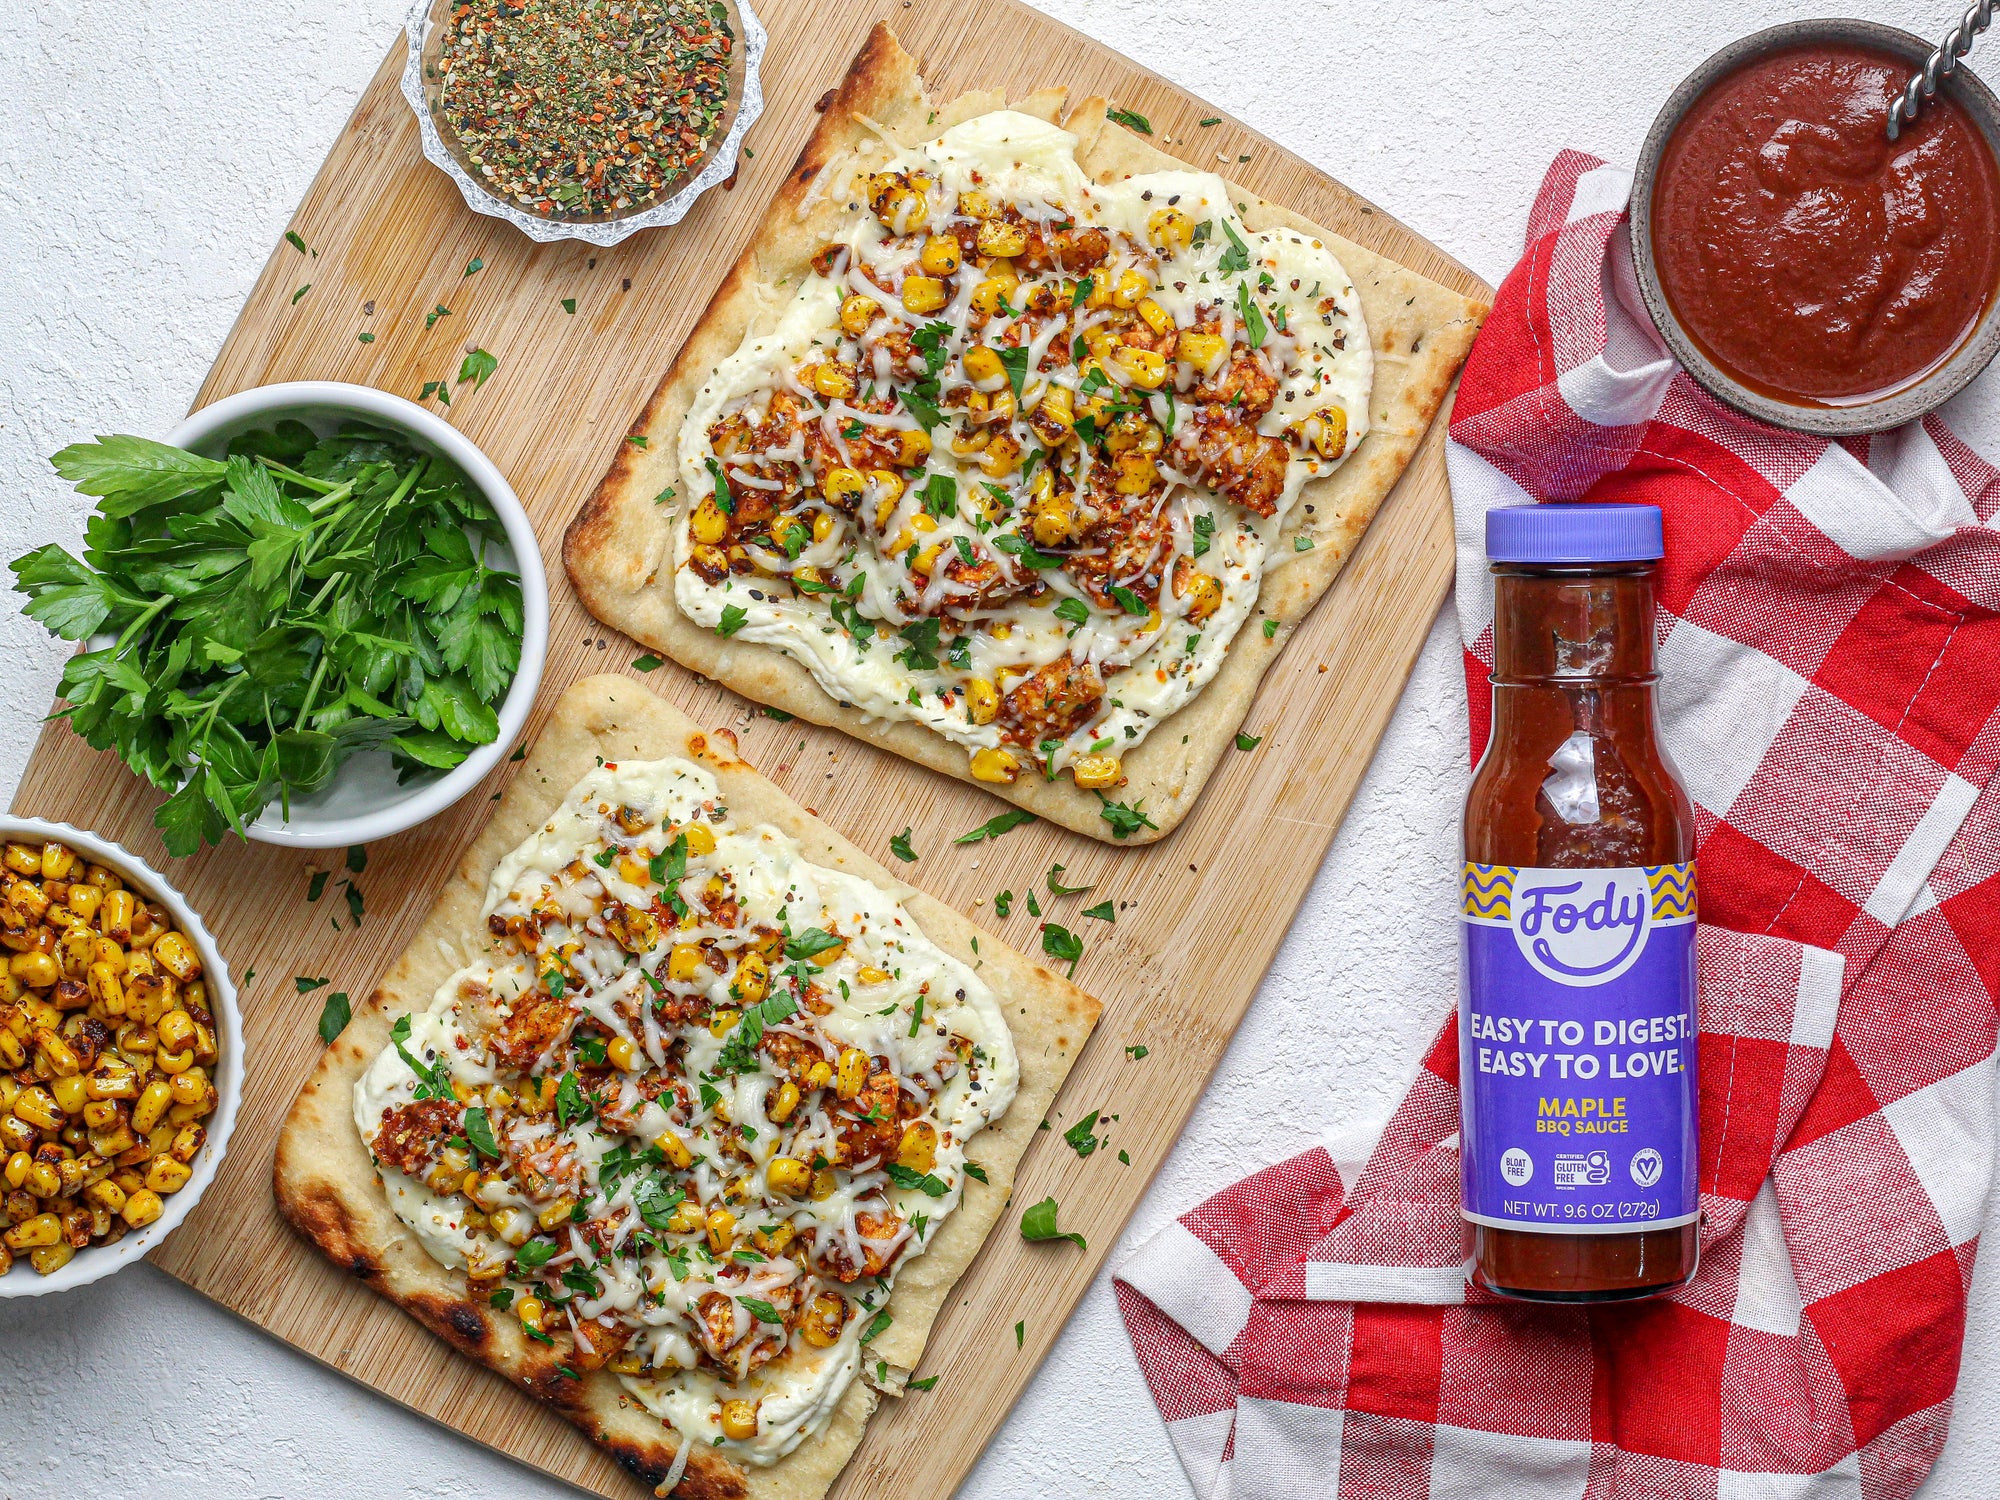 Fody’s Low FODMAP Flatbread Pizza with Grilled Maple BBQ Tofu